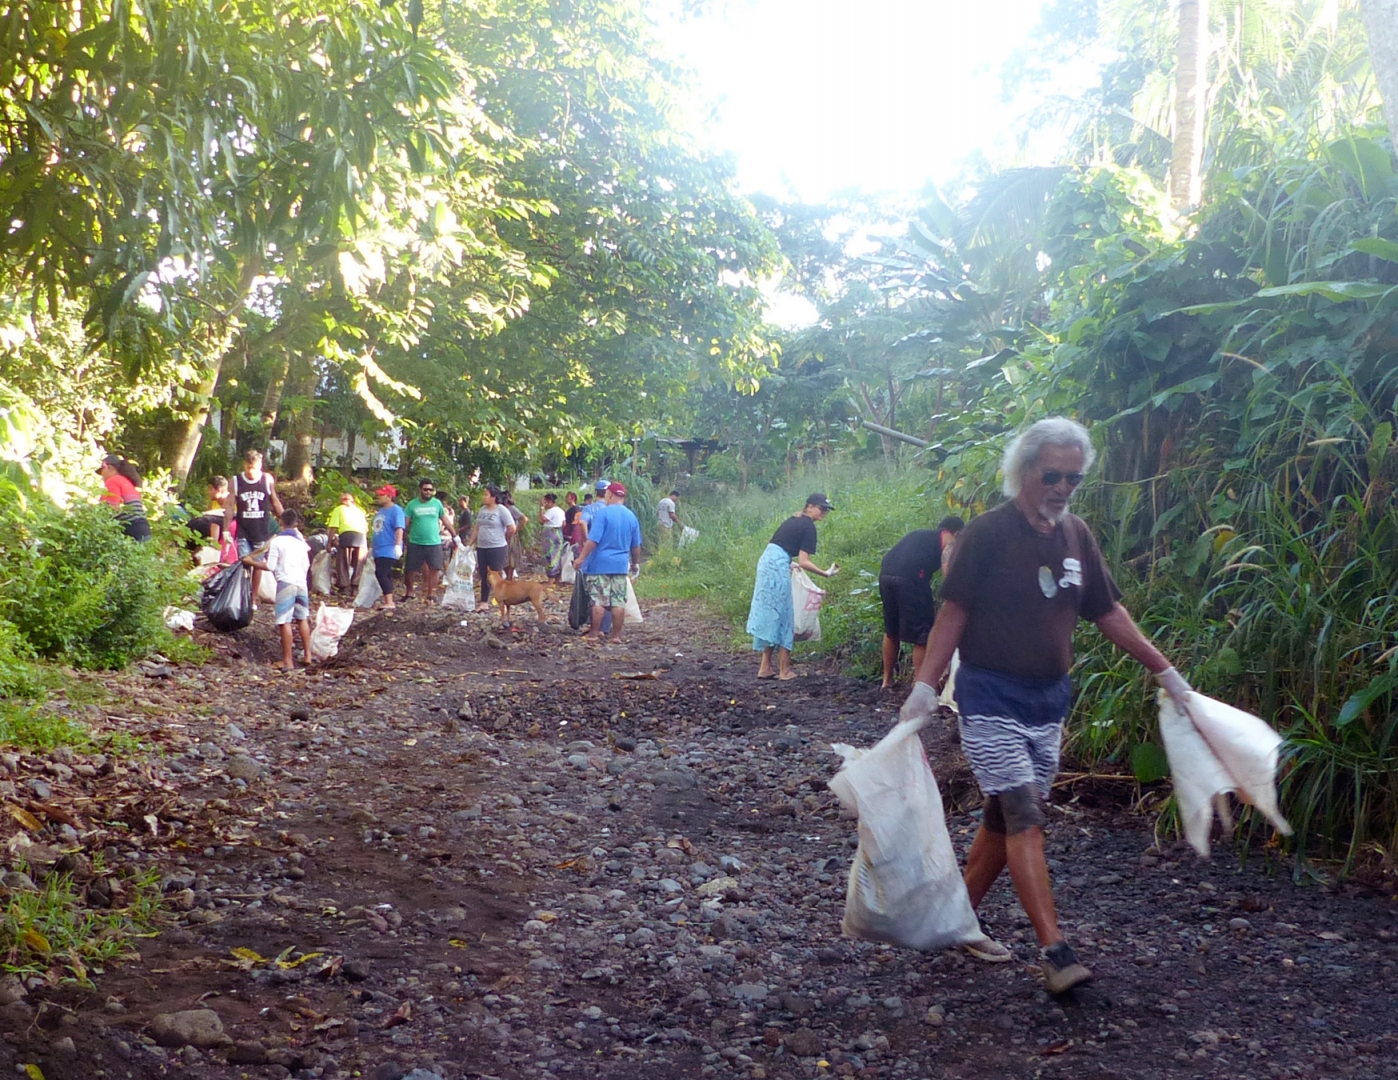 Community volunteers cleaning up one of the rivers in Samoa